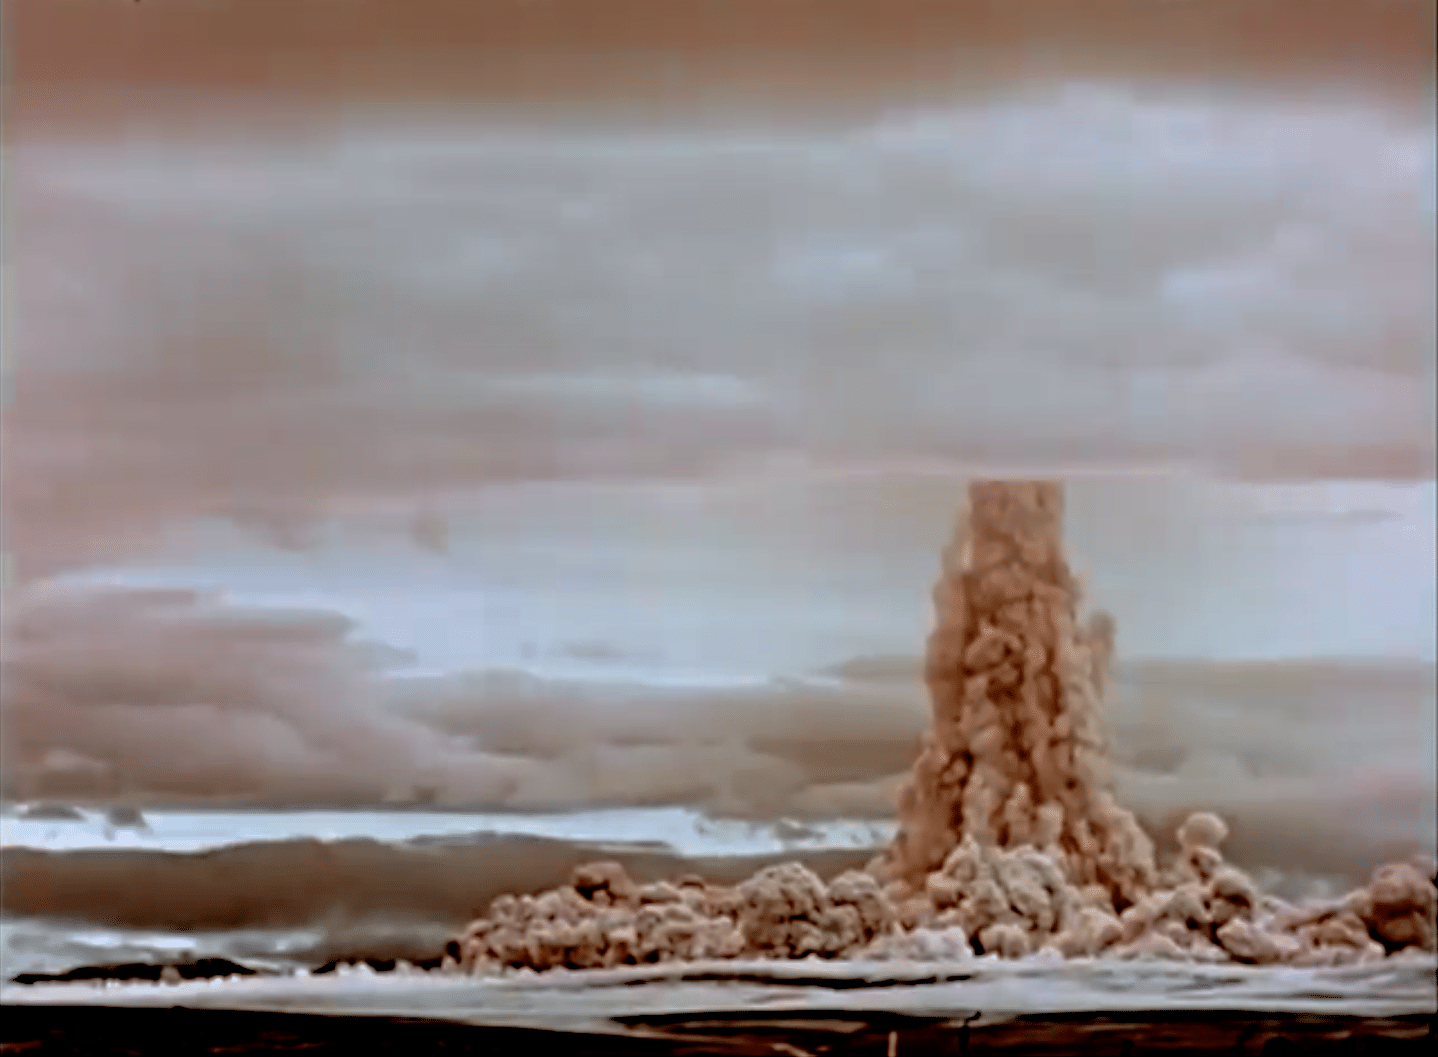 A still frame from a once-secret Soviet documentary of the Tsar Bomba nuclear test, released by Rosatom in August 2020.